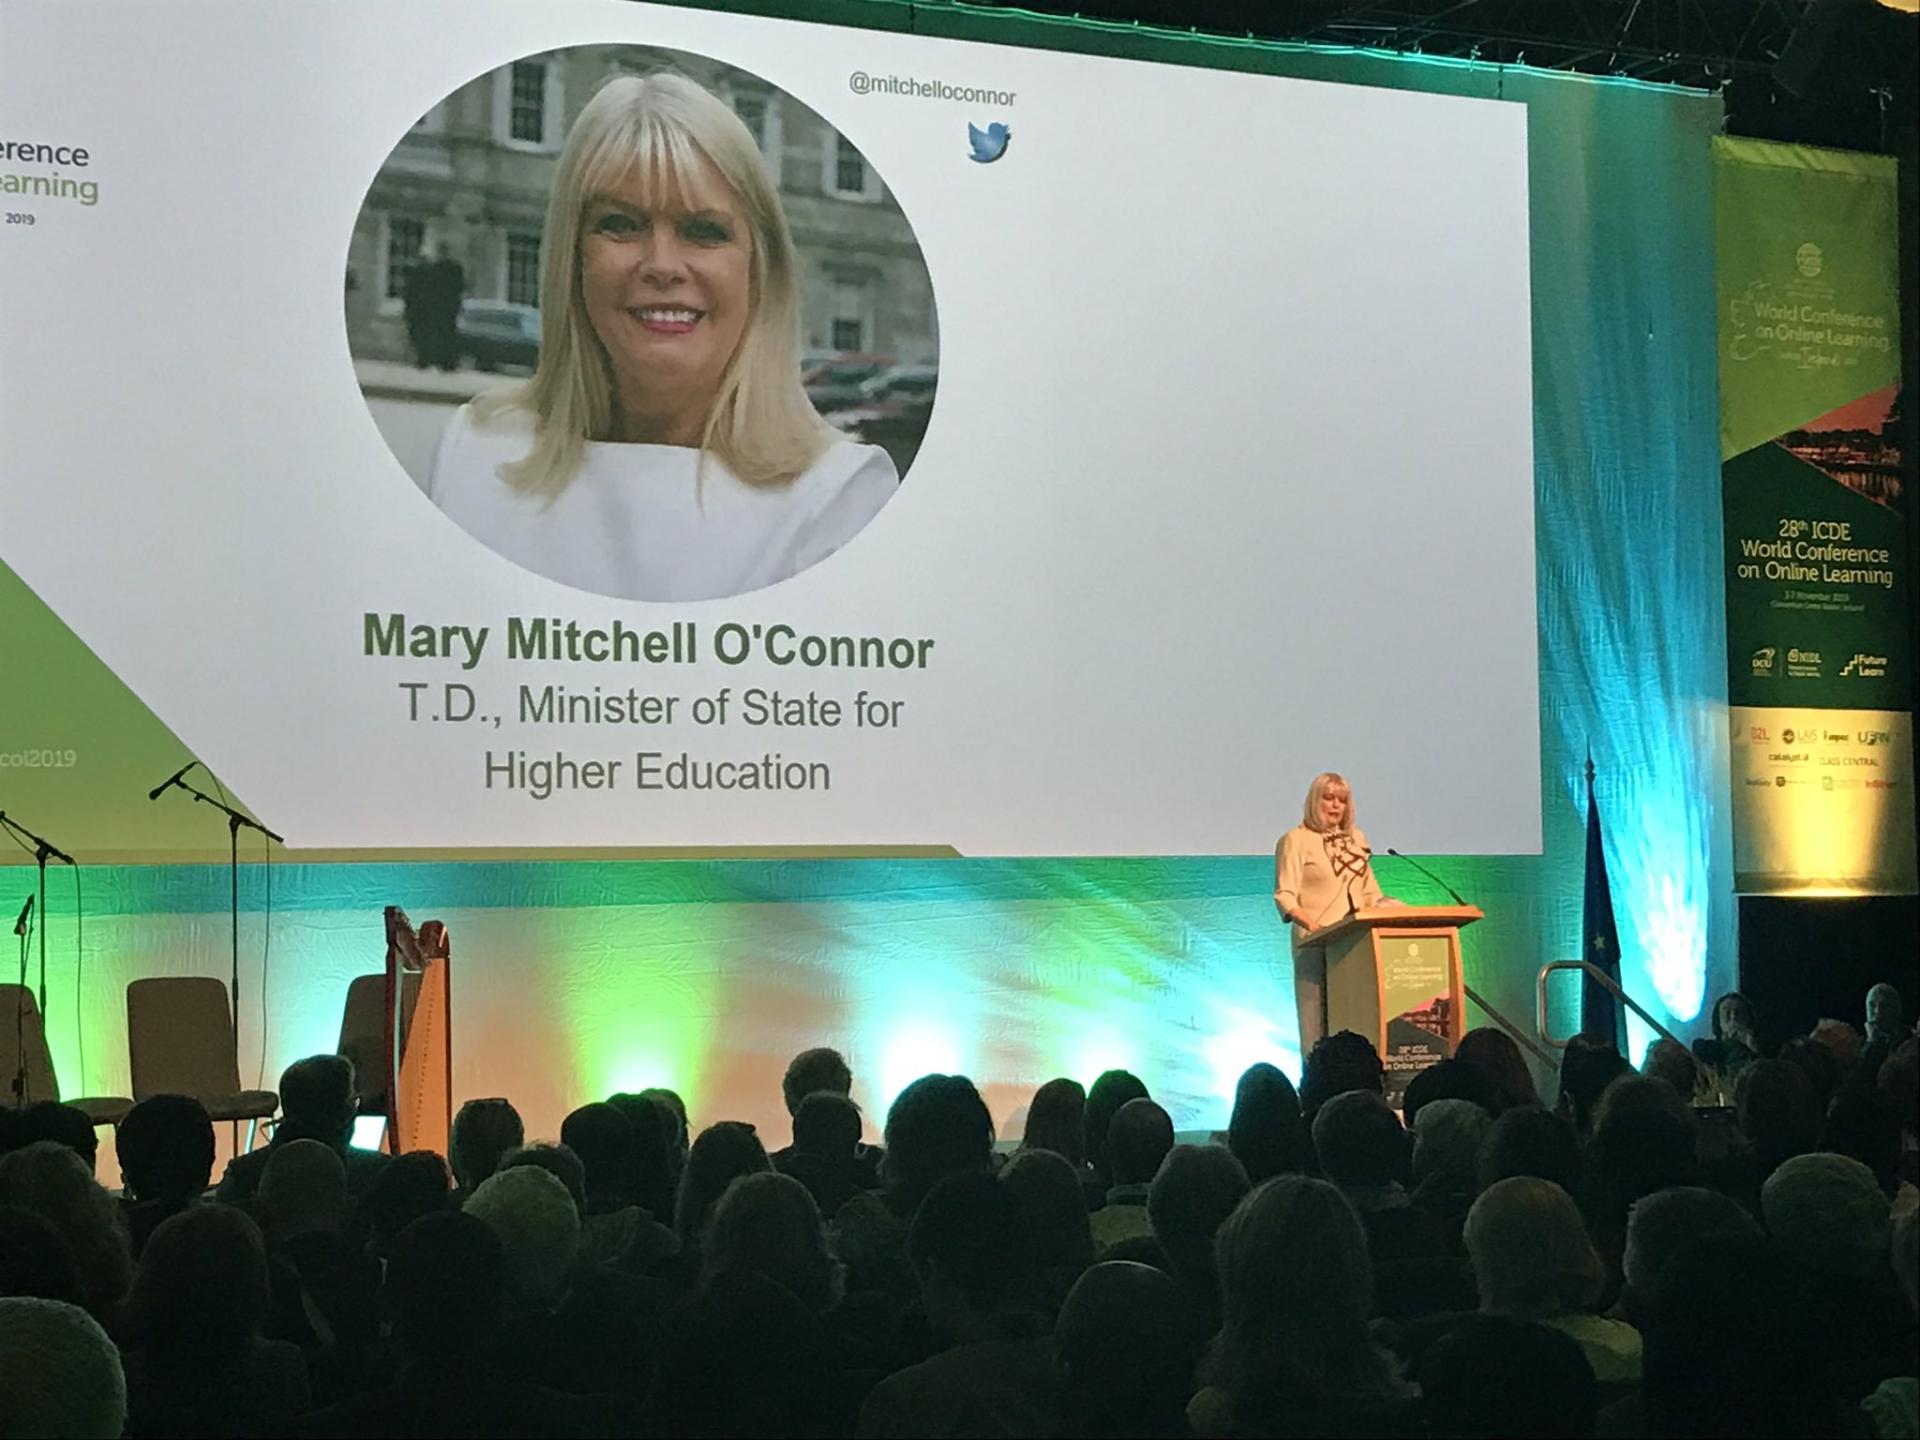 Minister tells World Conference on Online Learning 'lifelong learning needs to be the norm' as technology evolves 